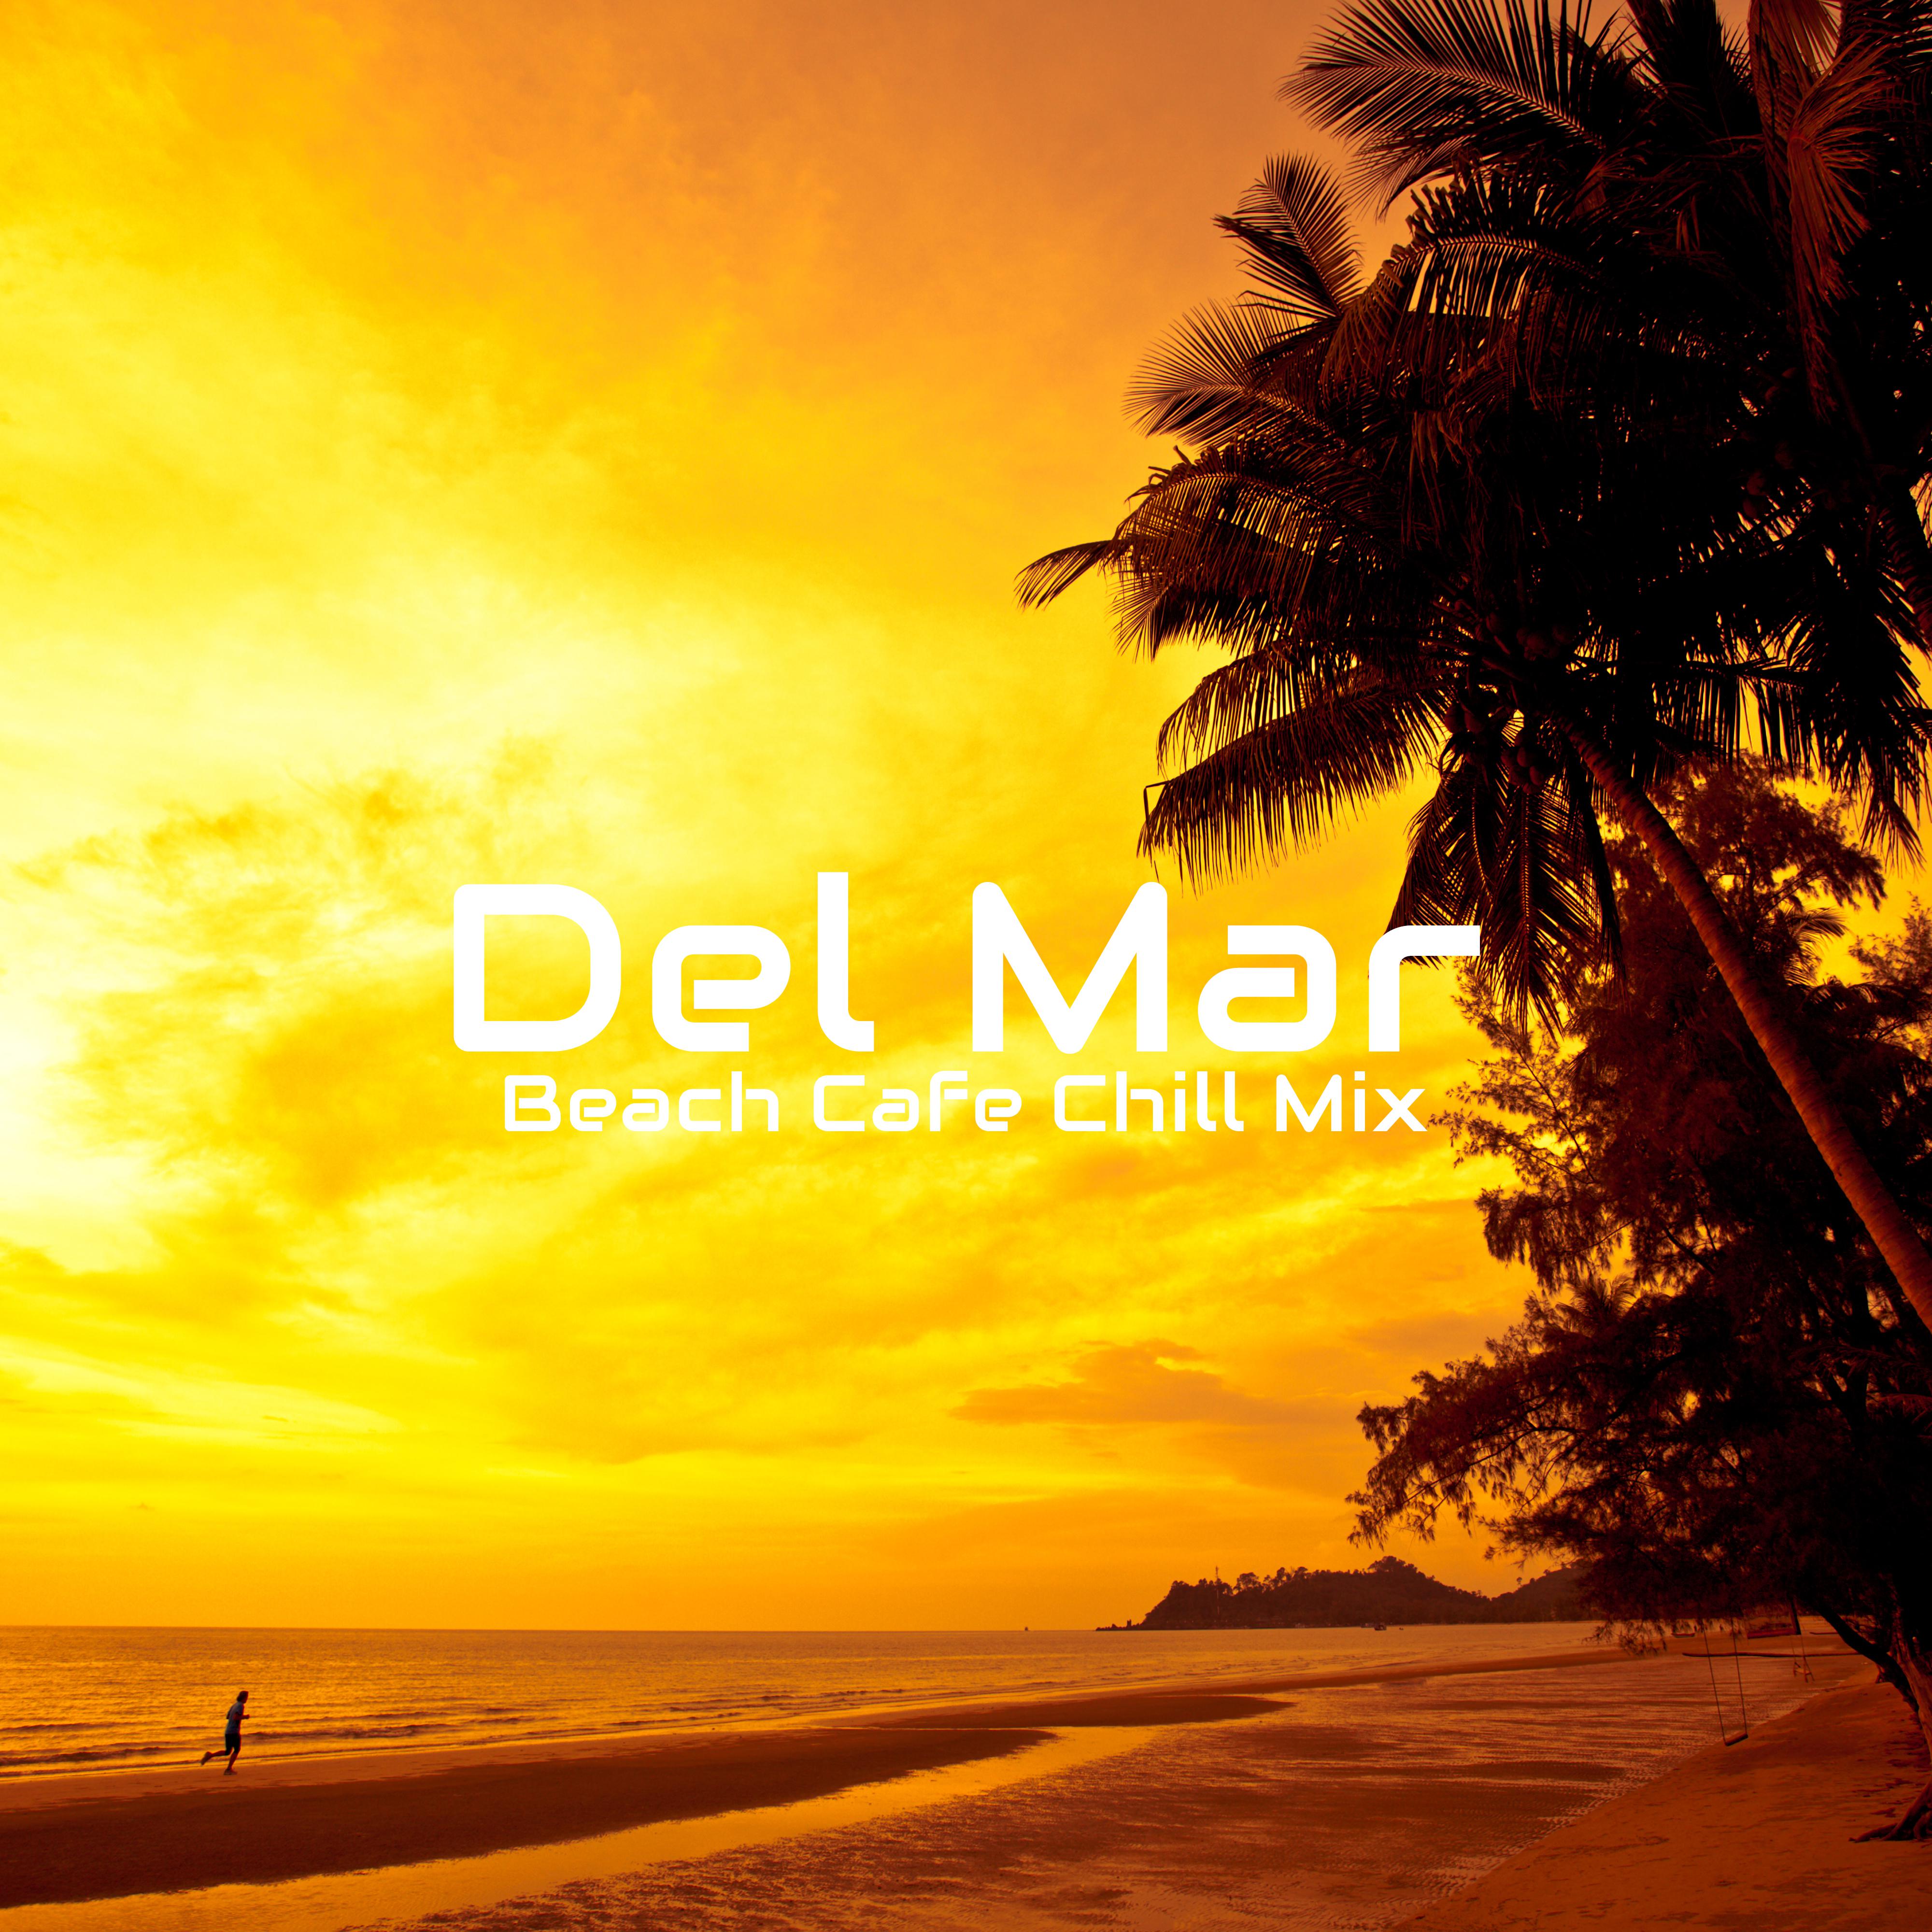 Del Mar Beach Cafe Chill Mix: 2019 Chillout Music Compilation, Vacation Soft Melodies, Sensual Relaxing Beats, Top Holiday Songs for Good Mood